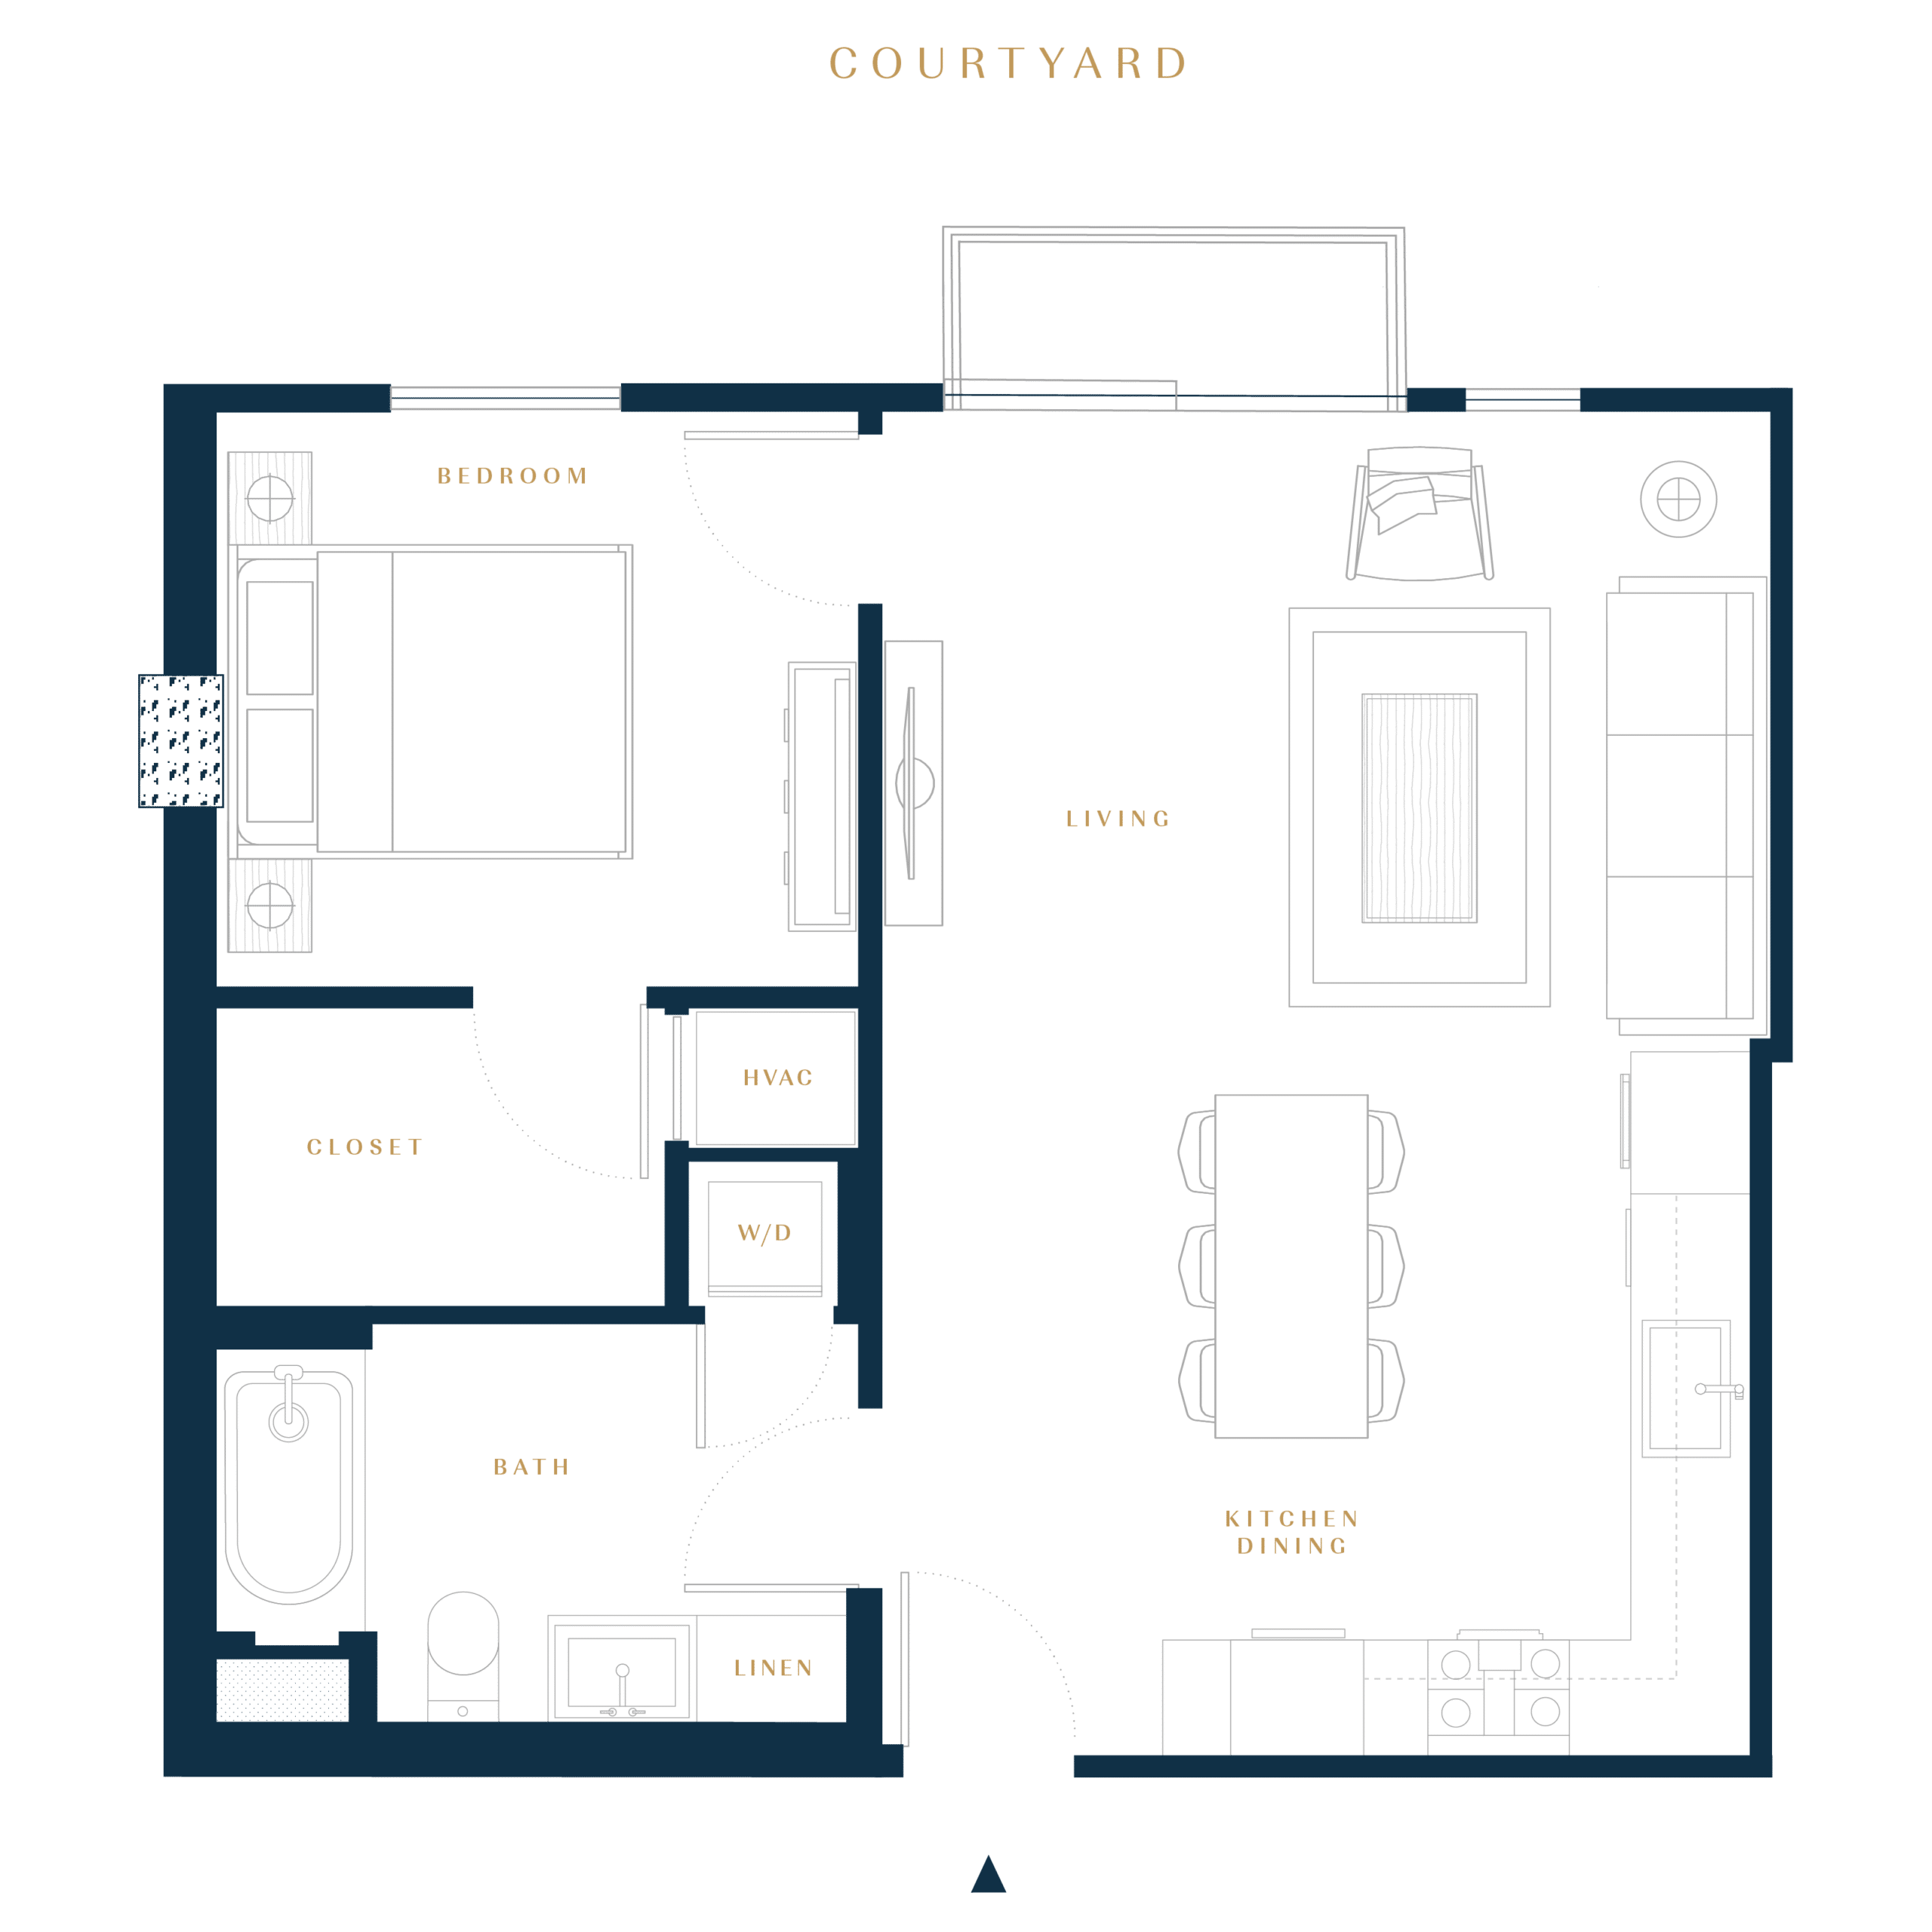 Residence 1E luxury condo floor plan in San Francisco Dogpatch